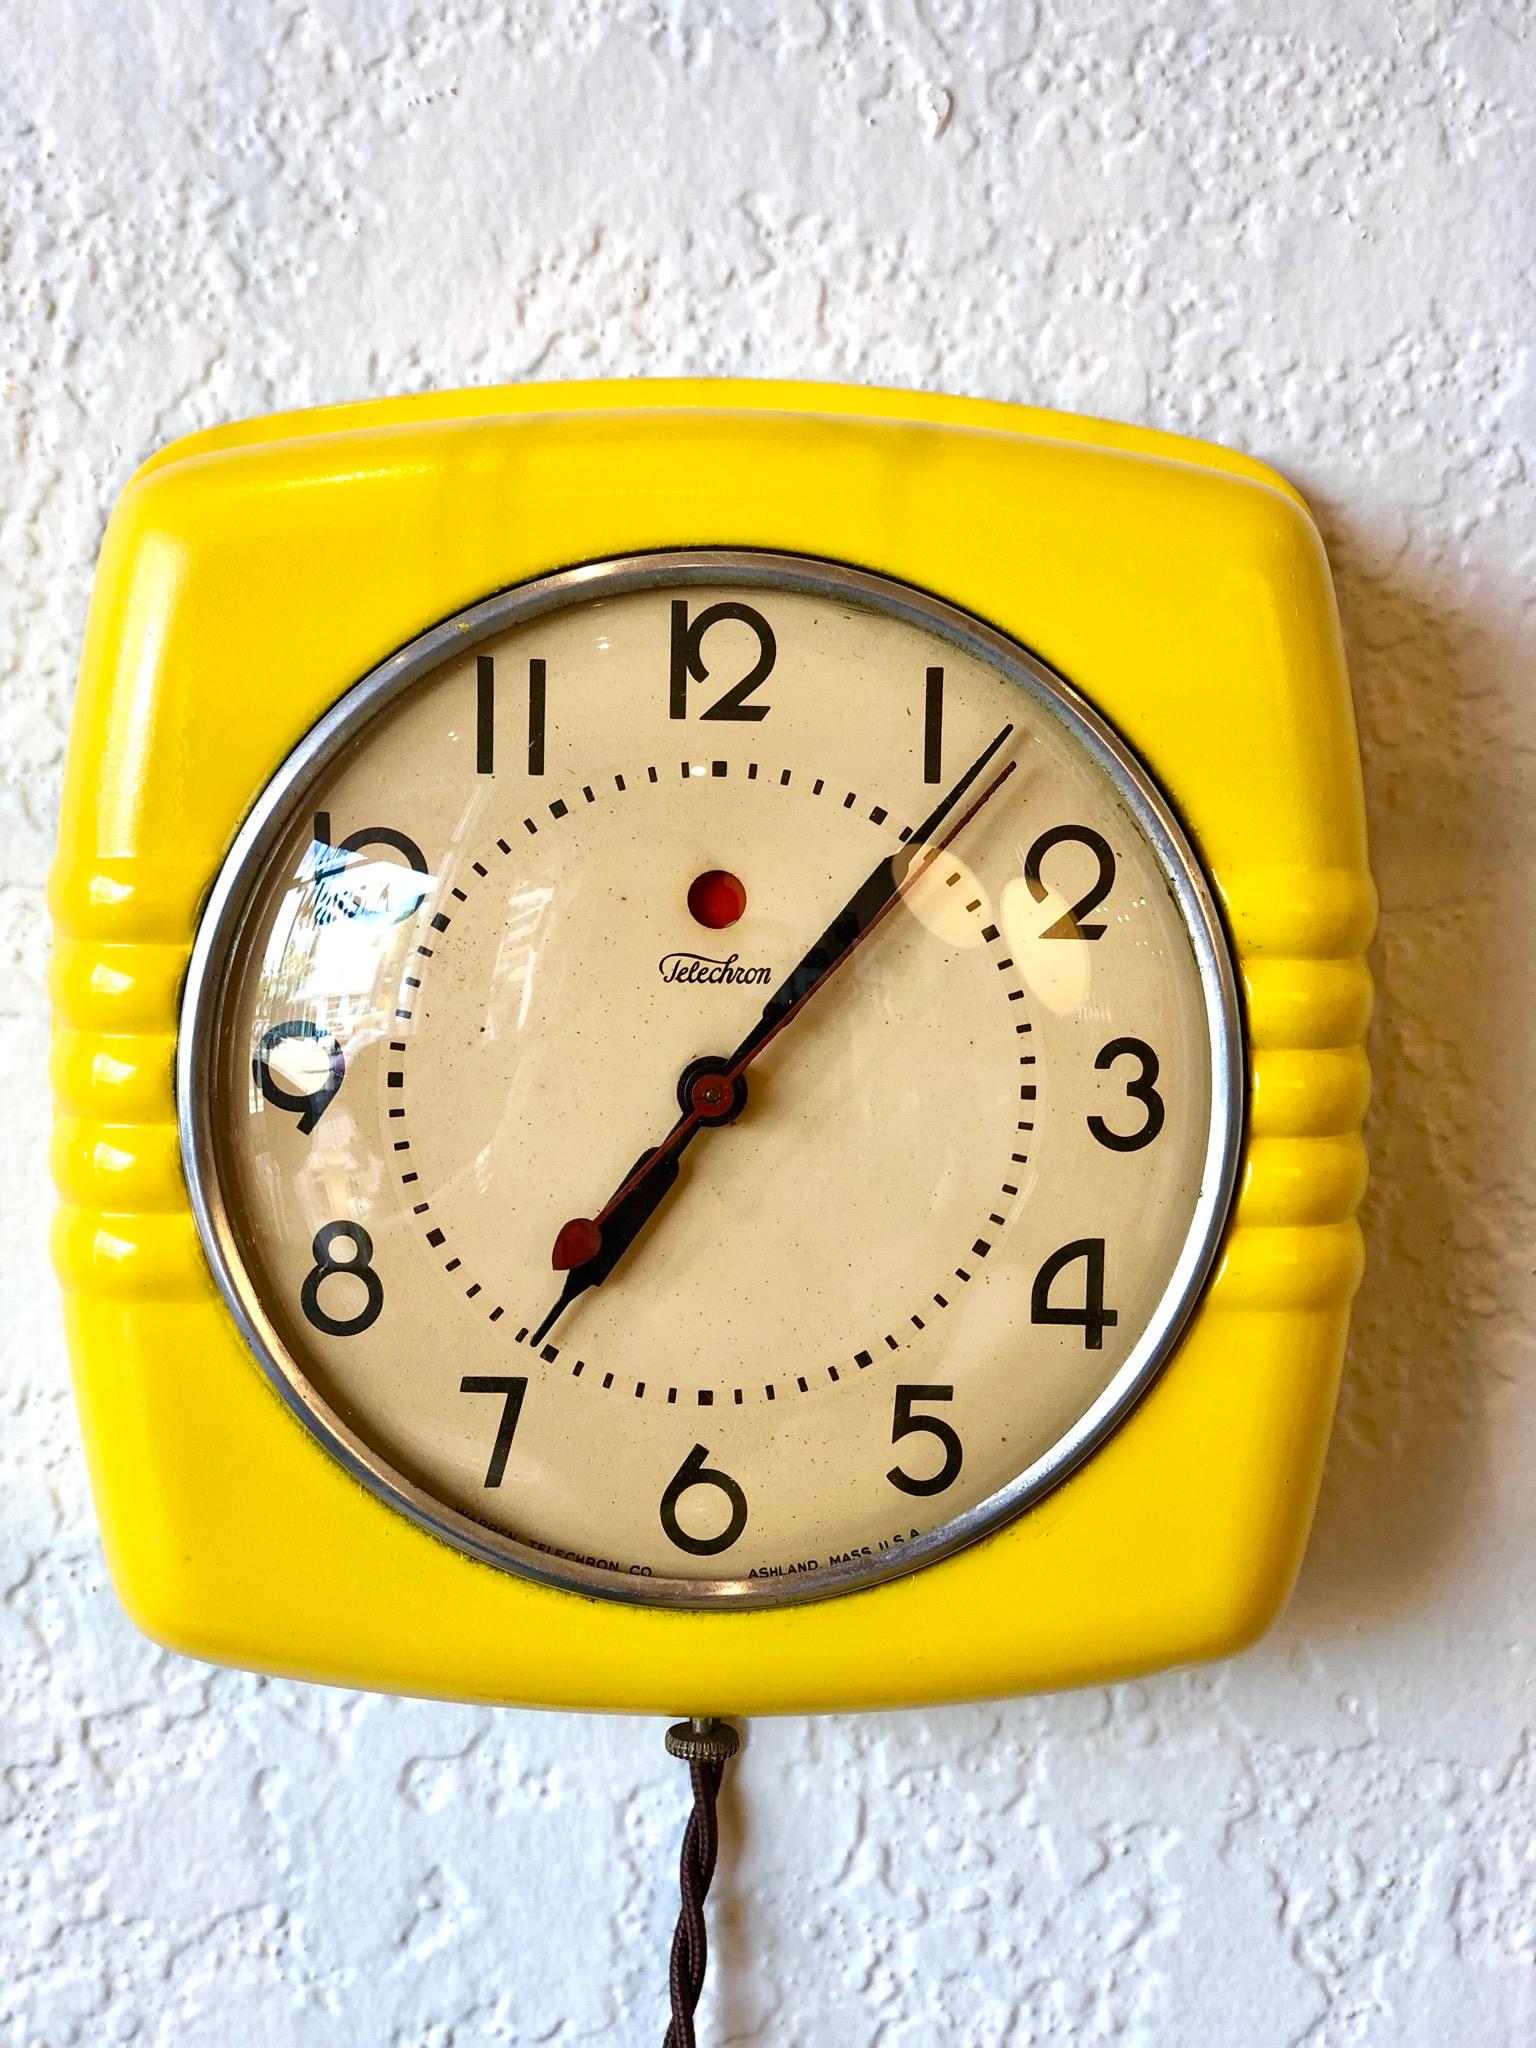 Beautiful yellow metal and glass Art Deco wall clock completely restored to its glory days, new cloth extended cord the piece has been resprayed in yellow, and its in perfect working condition. Glass case and metal frame.